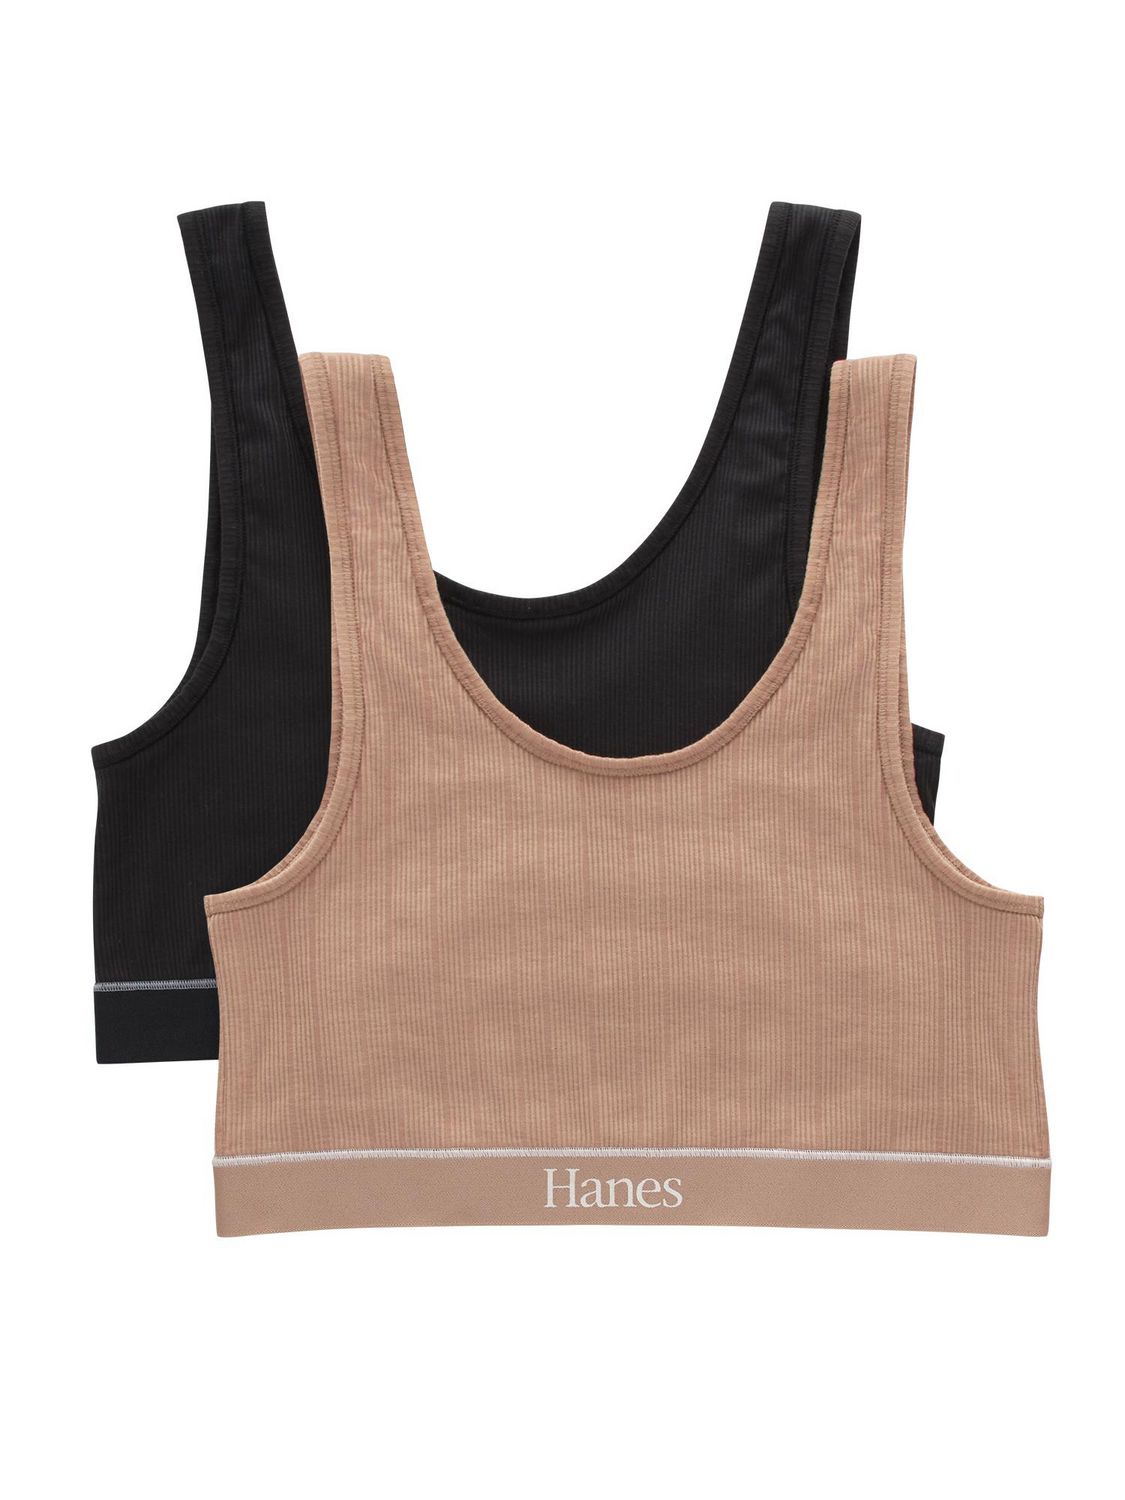 Hanes Women's Originals Racerback Top, Cropped Tank with Built-in Bra,  2-Pack, Black/Black/Black, X-Small at  Women's Clothing store